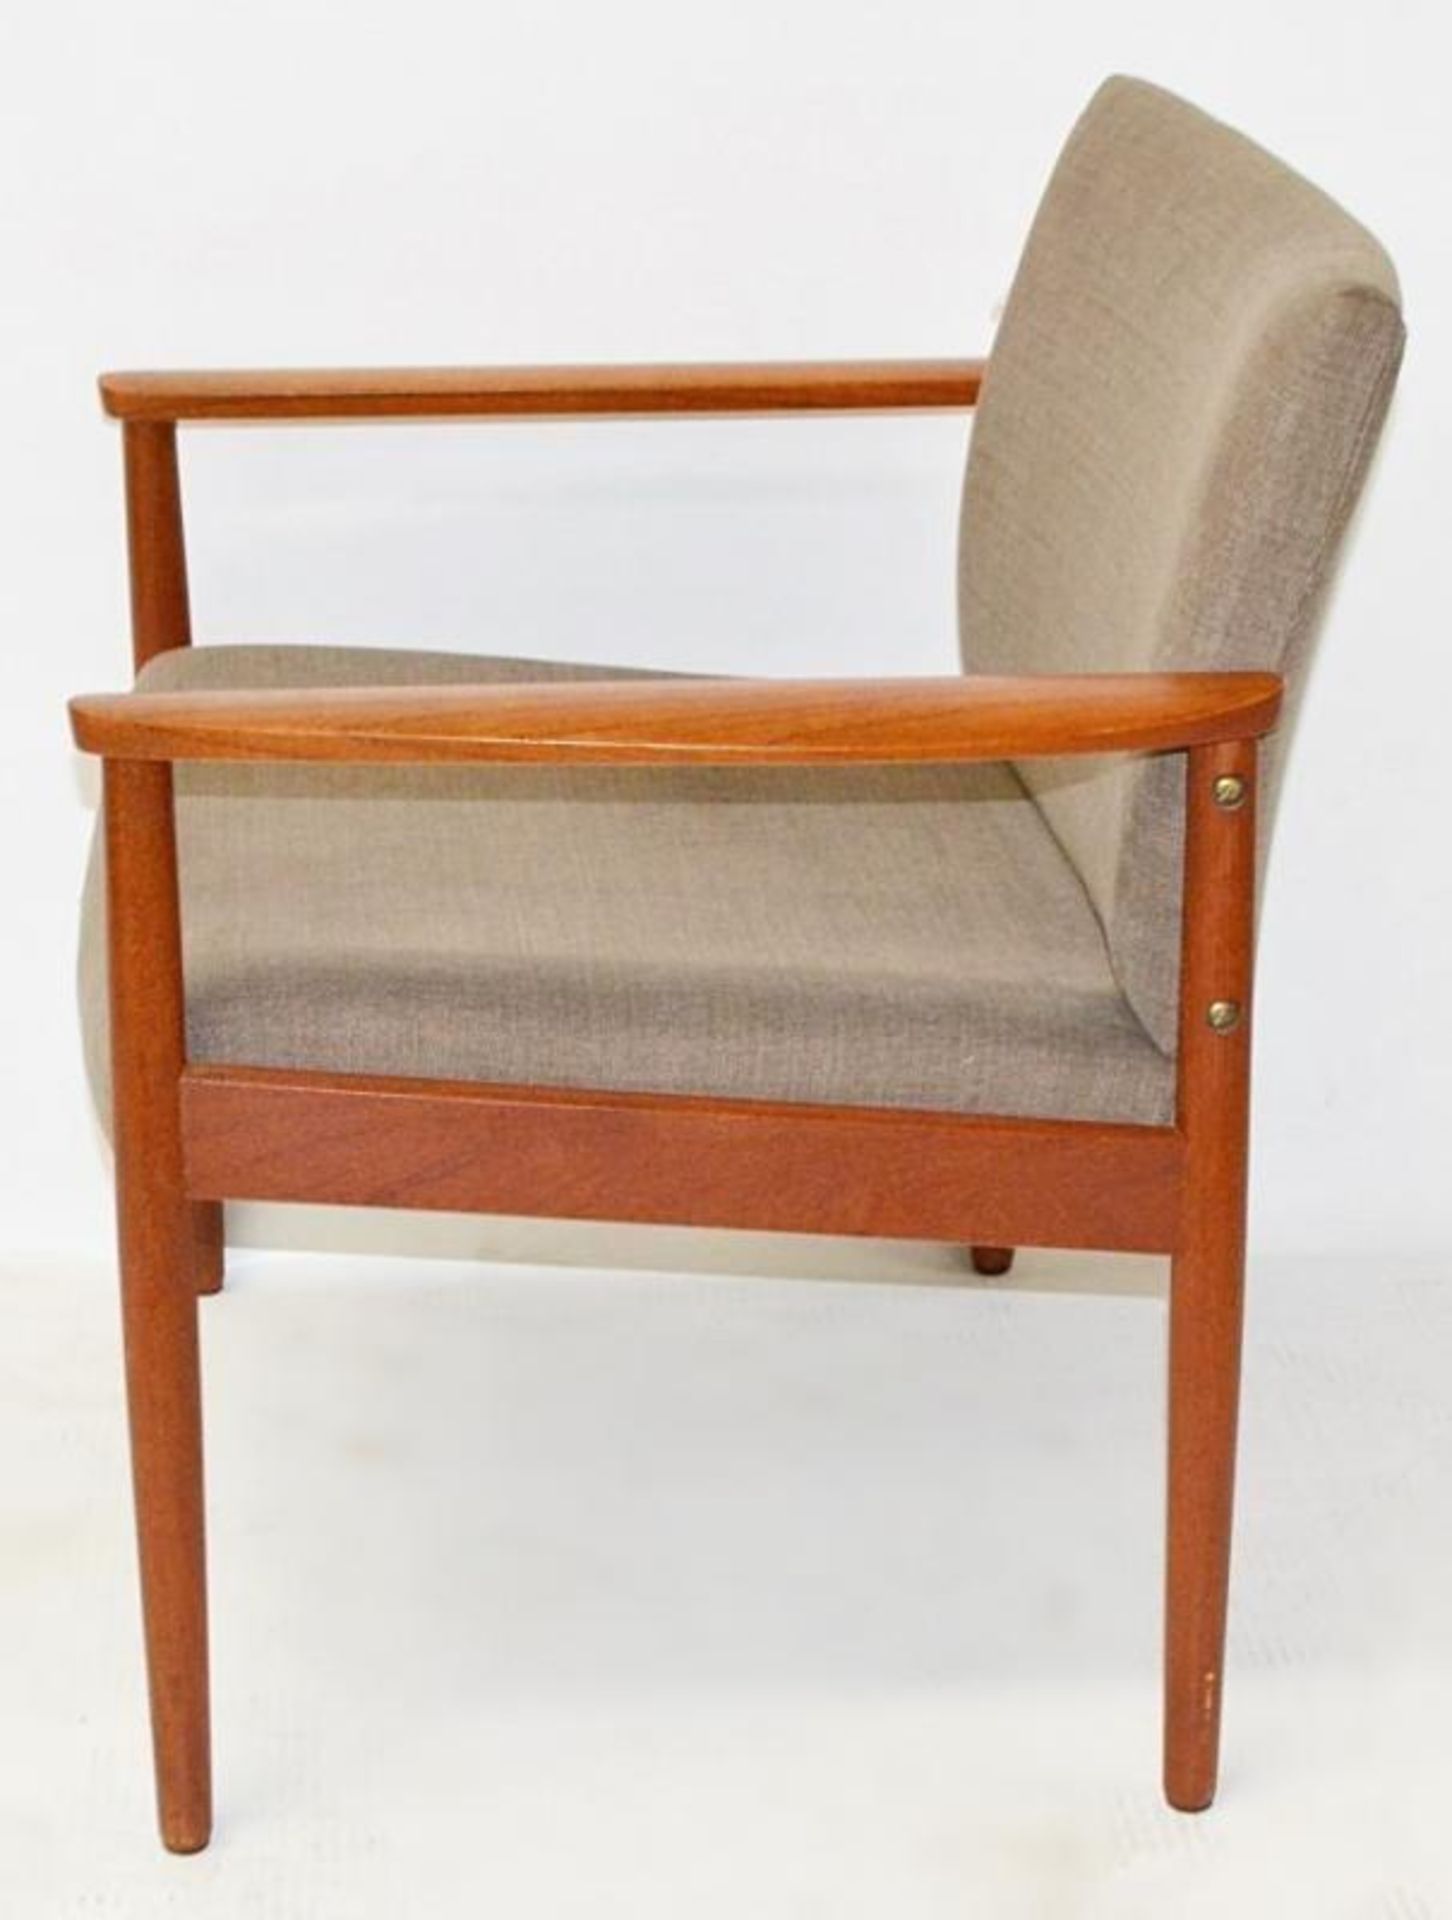 1 x JAB King Upholstery Mid Century Chair Hot Madison Reloaded Fab - Dimensions (approx): W68 x D57,